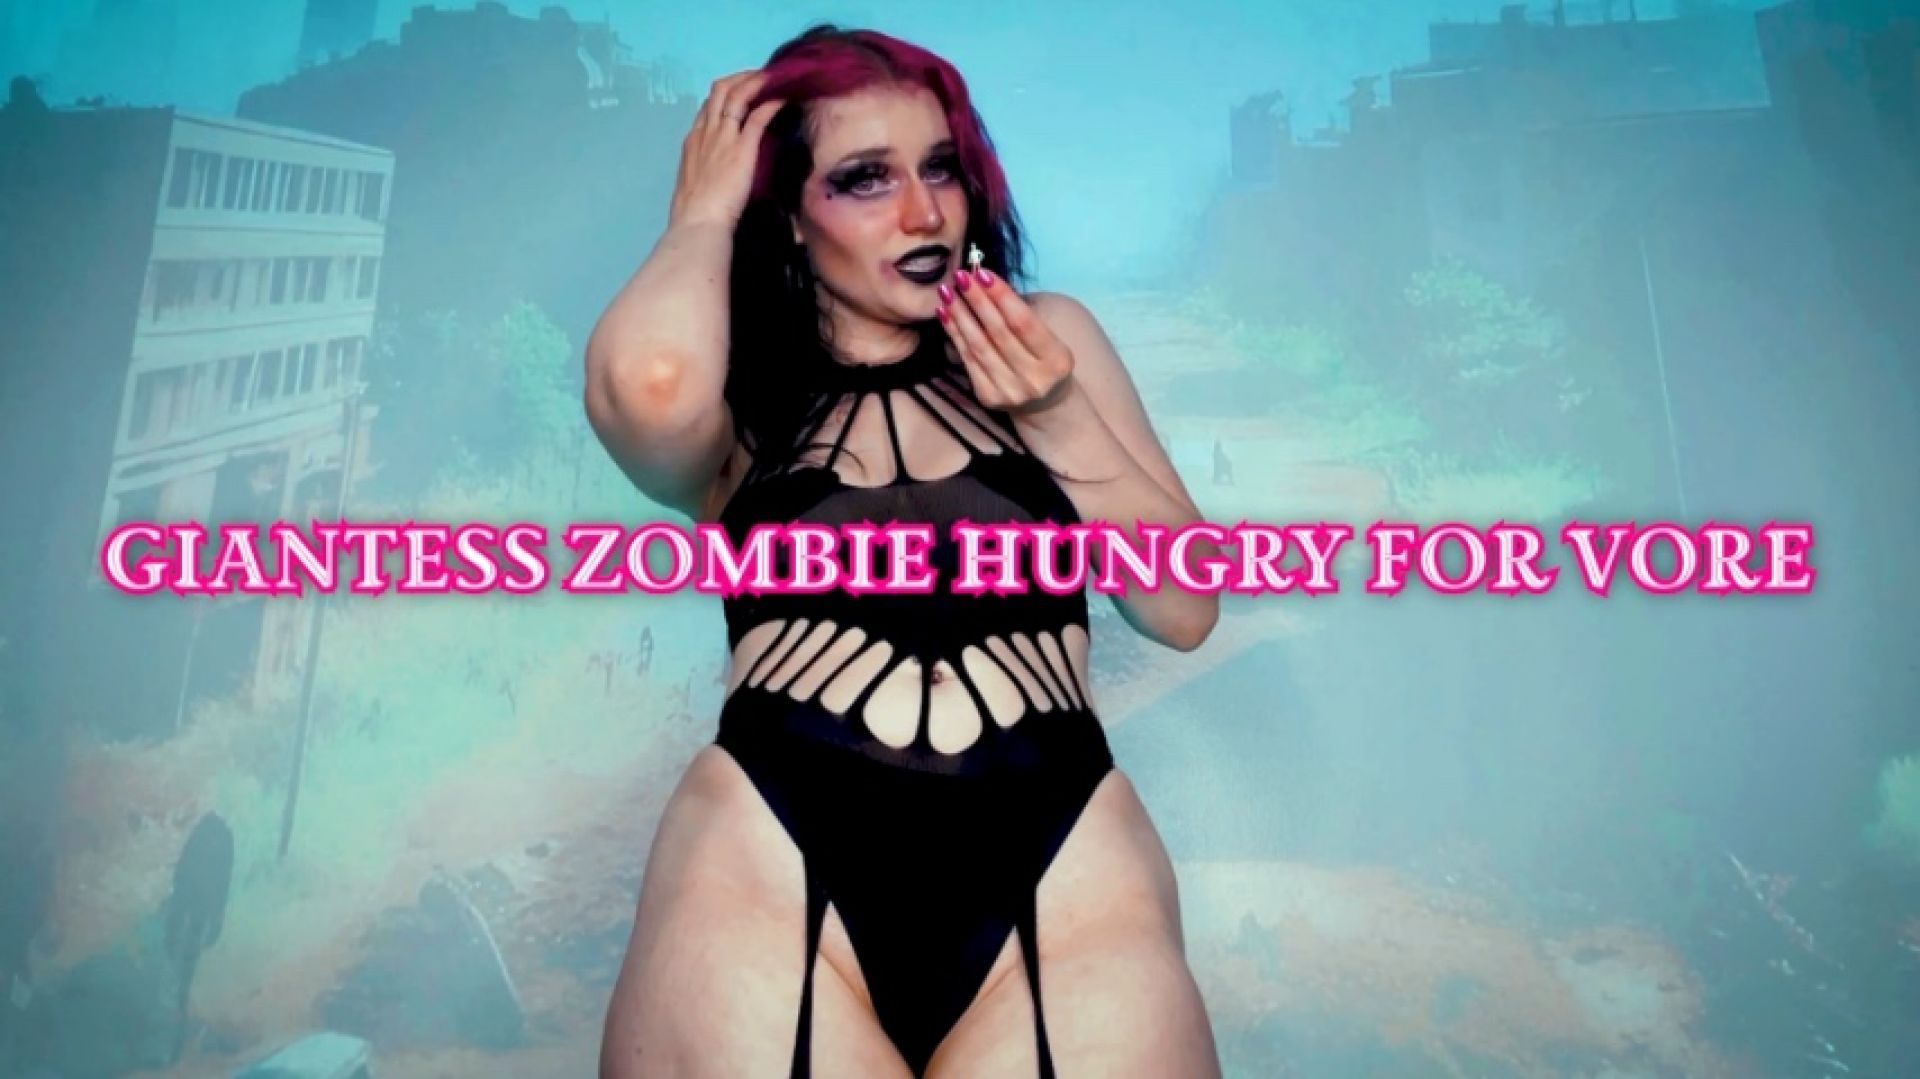 Giantess Zombie Hungry for Vore